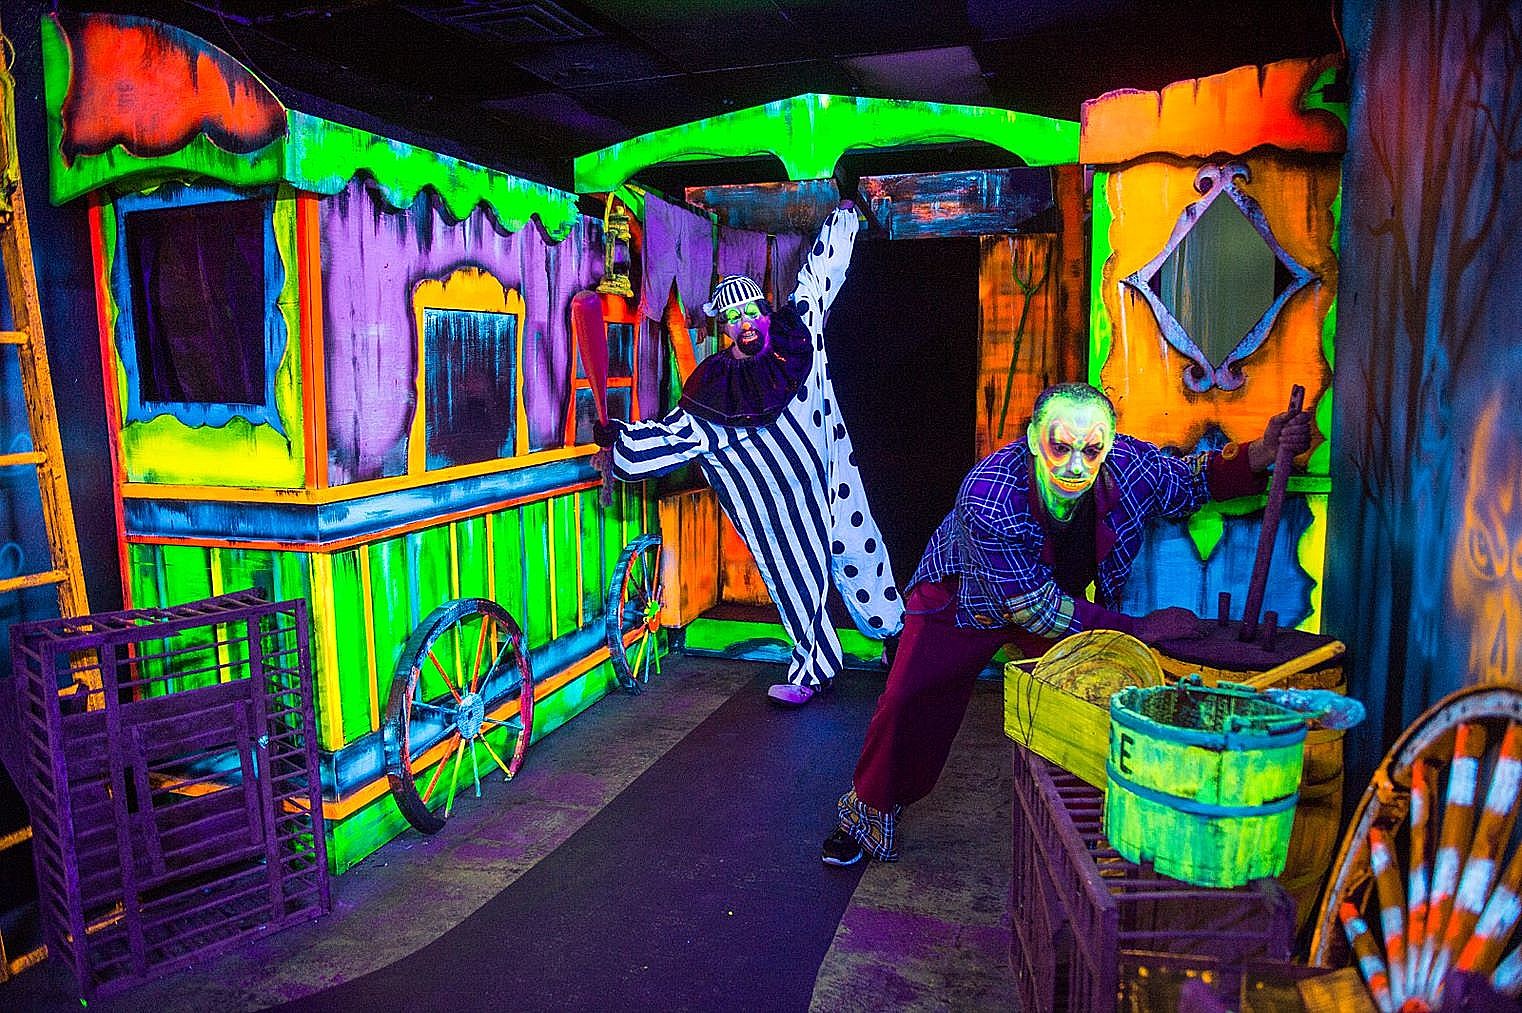 A Look Inside The Spooky "Fright Fest" 2022 at Six Flags